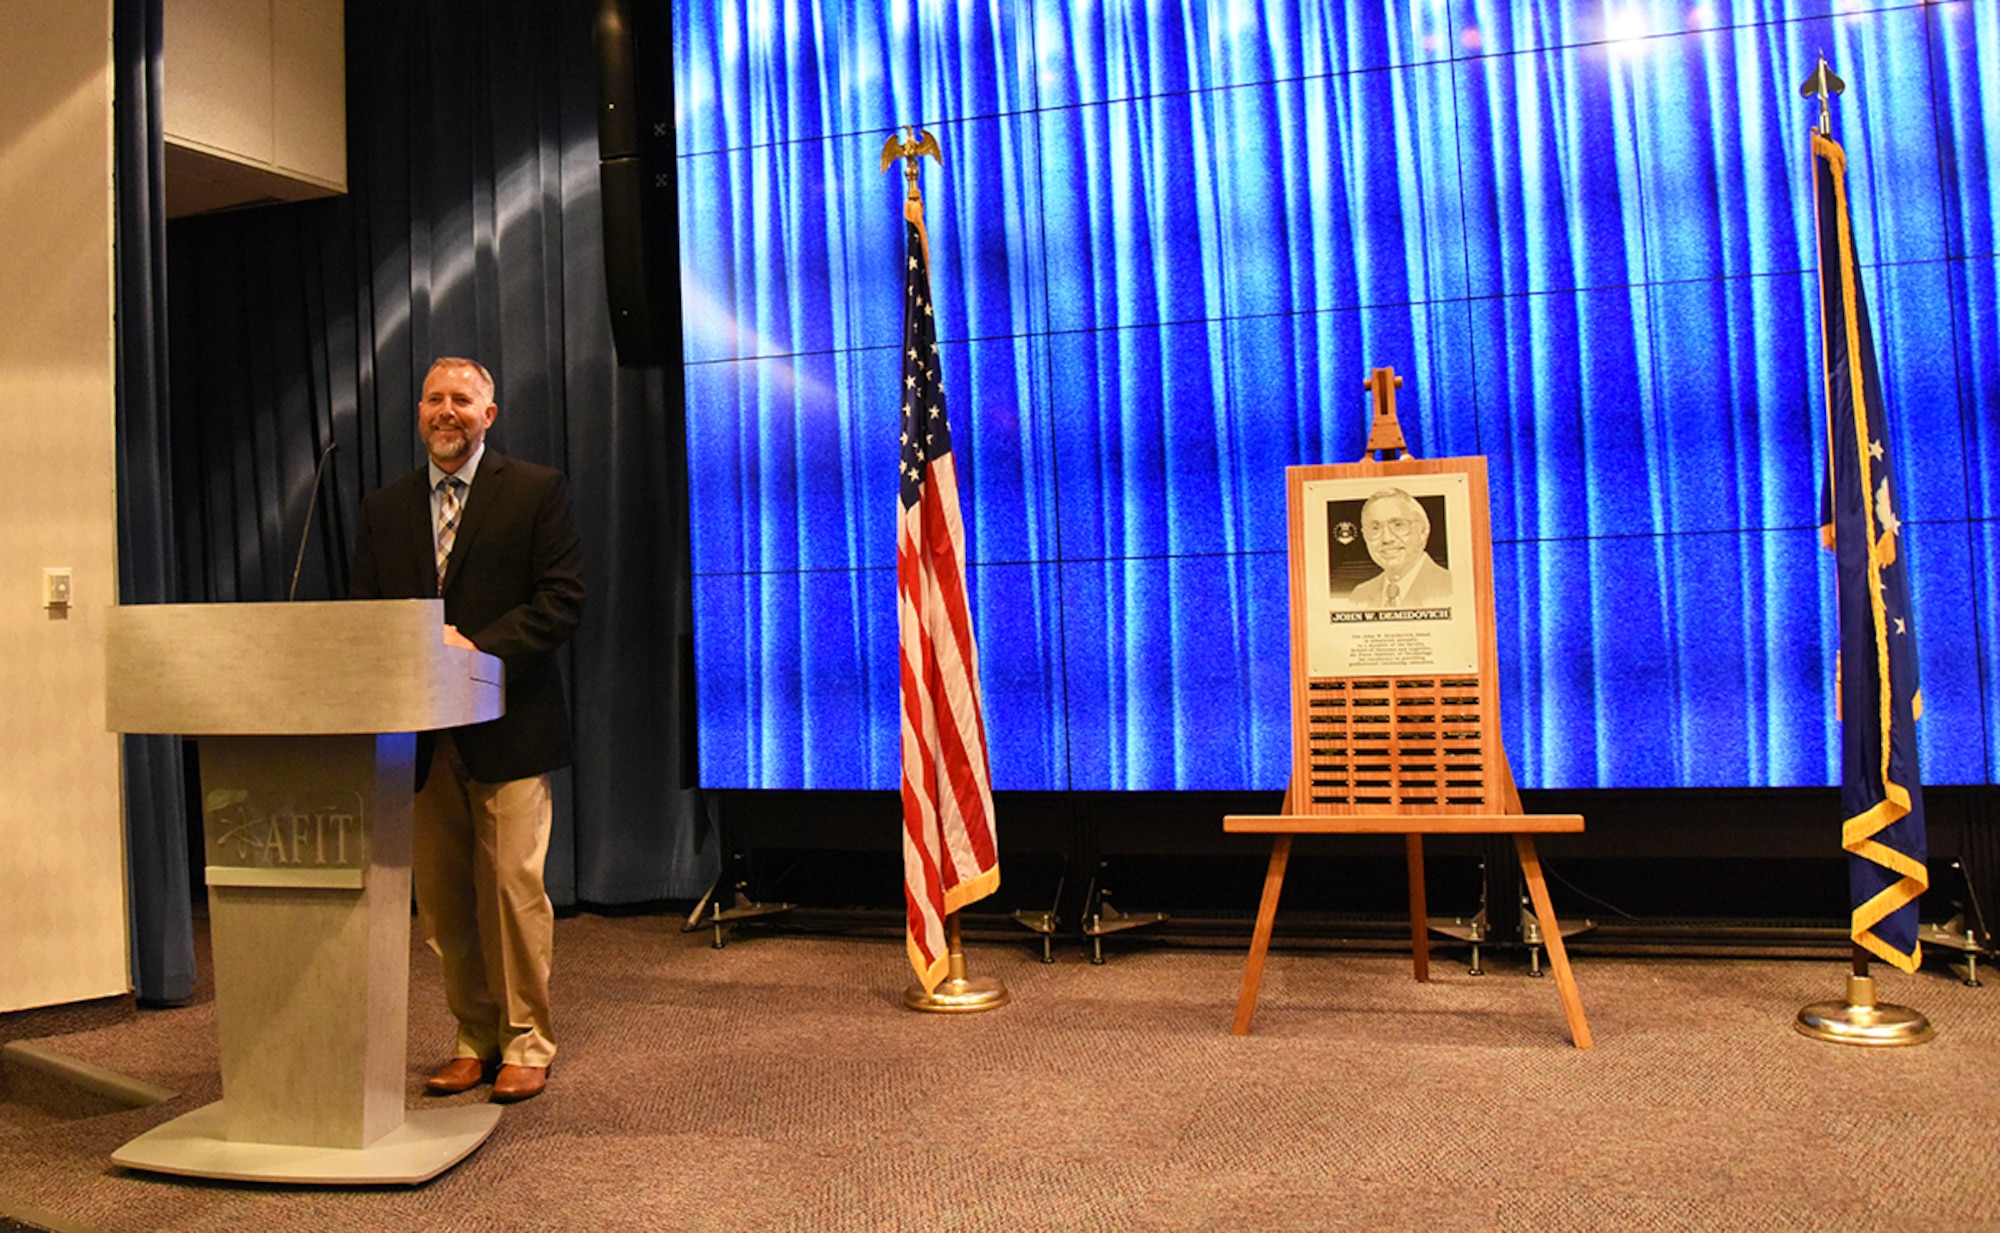 The Air Force Institute of Technology’s School of Systems and Logistics presented Mr. Eric Glover with the John W. Demidovich Award during a ceremony on Aug. 8, 2019, at Maxwell Air Force Base, Ala.  Established in 1989, the Demidovich Award is the highest honor that the LS faculty can bestow upon its members. It recognizes outstanding ability and service sustained throughout an individual’s tenure at the School. Mr. Glover is the 17th recipient of the award.